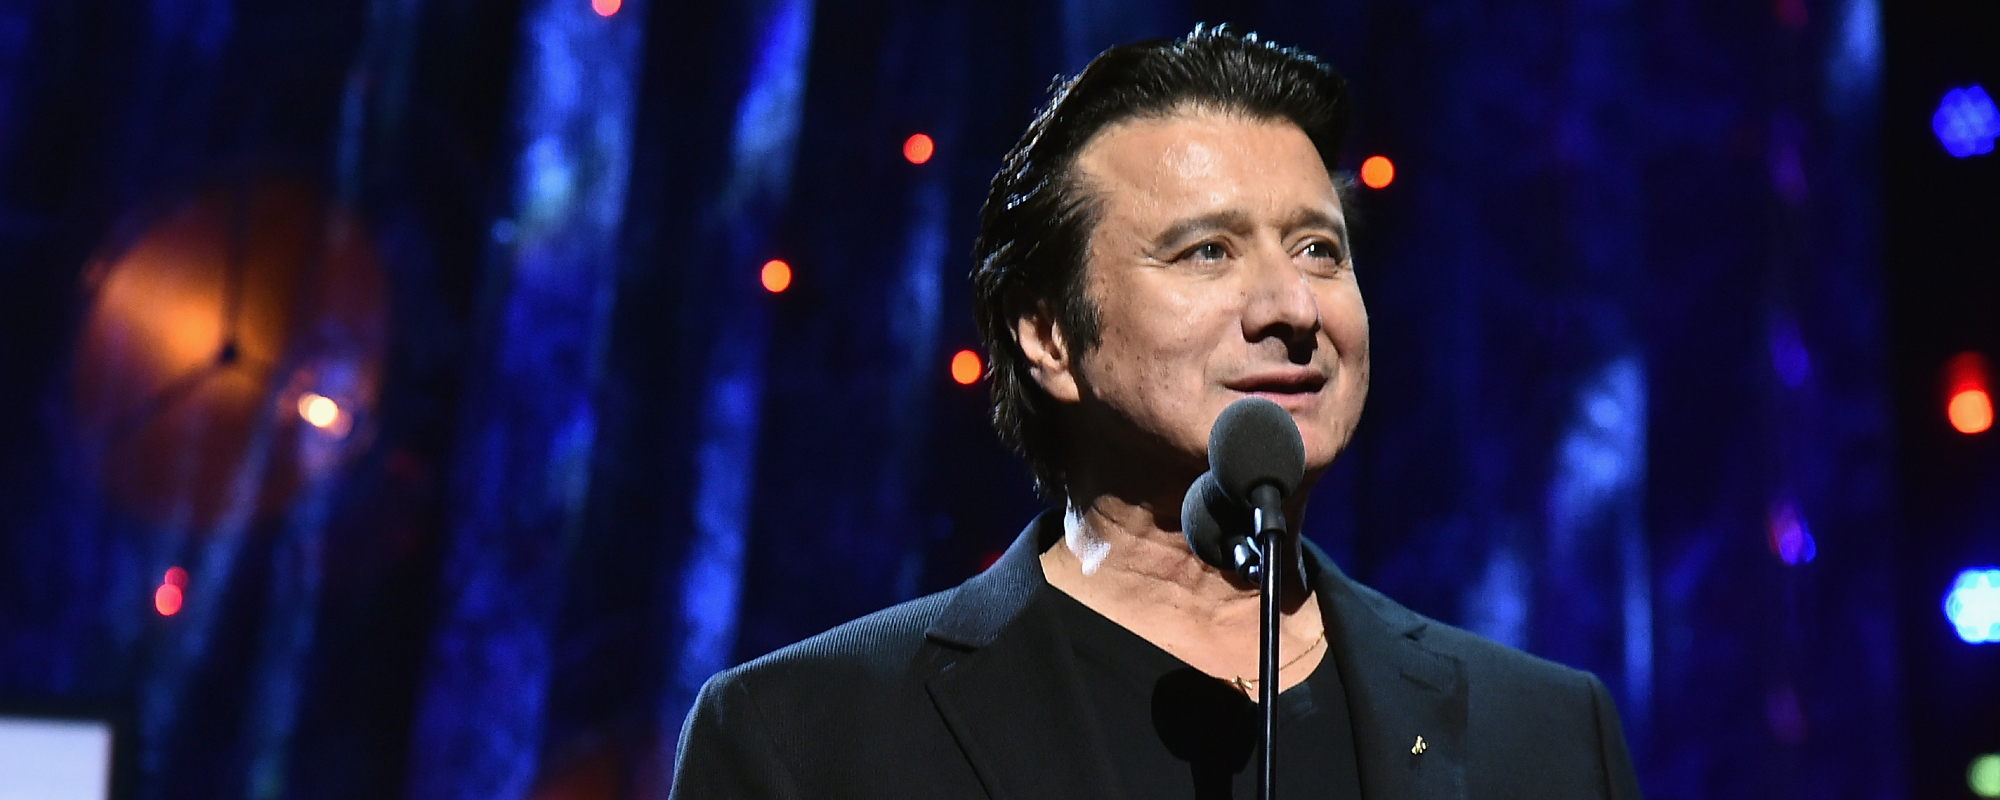 Former Journey Singer Steve Perry Shocked by Recent “Don’t Stop Believin” Milestone